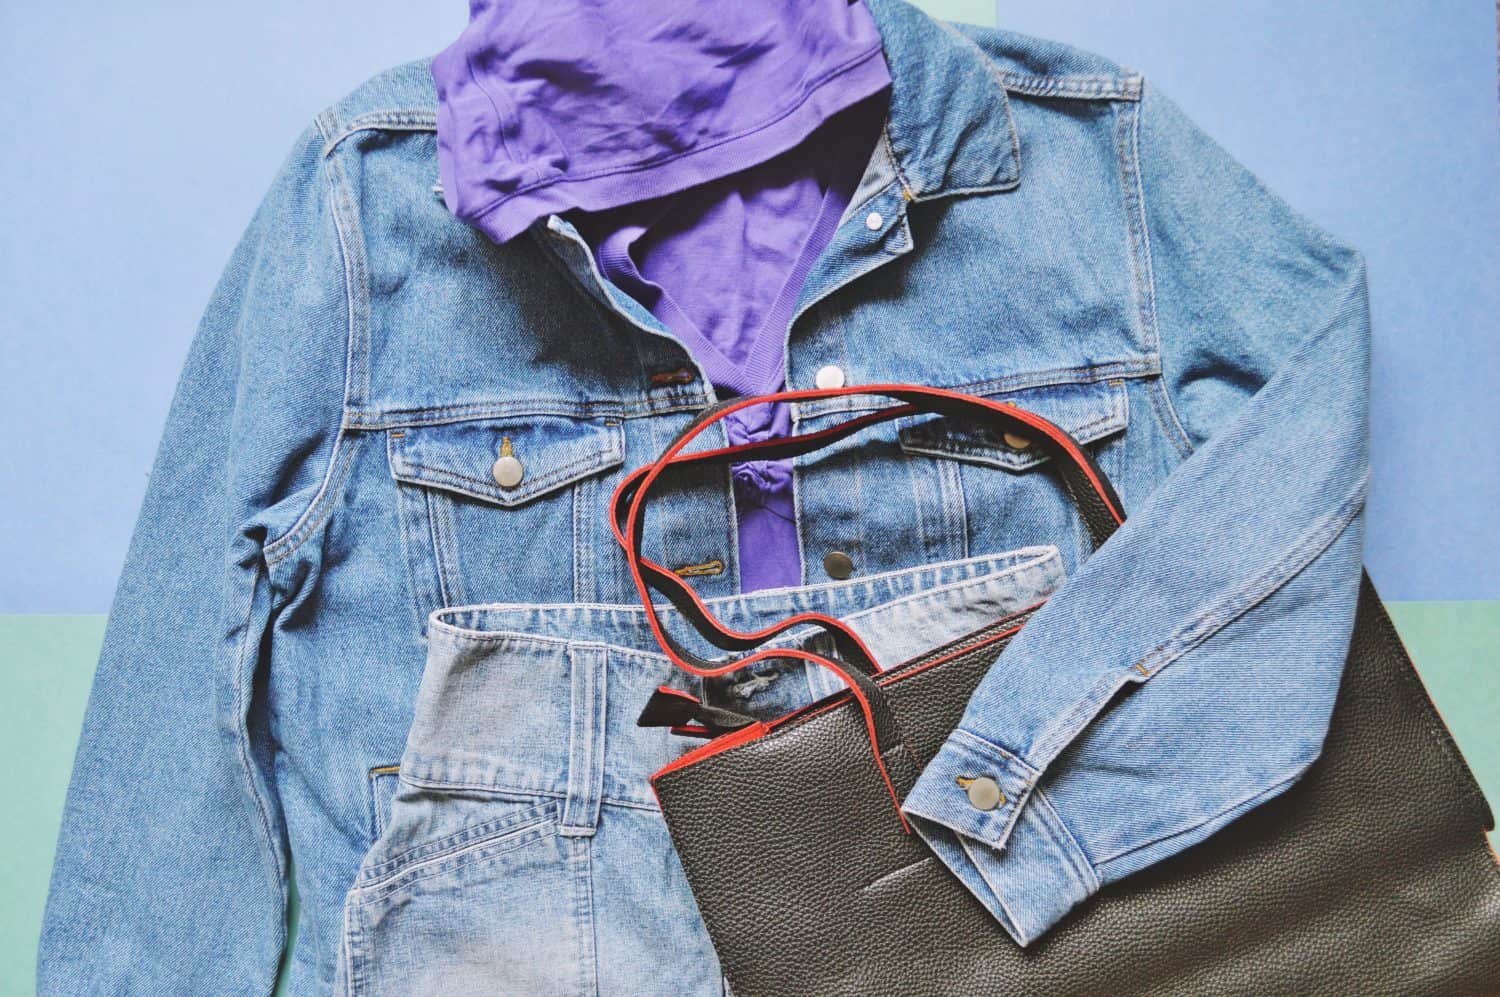 90s style fashion outfit. Purple hoody sweatshirt, blue denim jacket, cotton skirt and trendy bag. Fashionable summer women's clothes in the style of sports chic. Flat lay photo